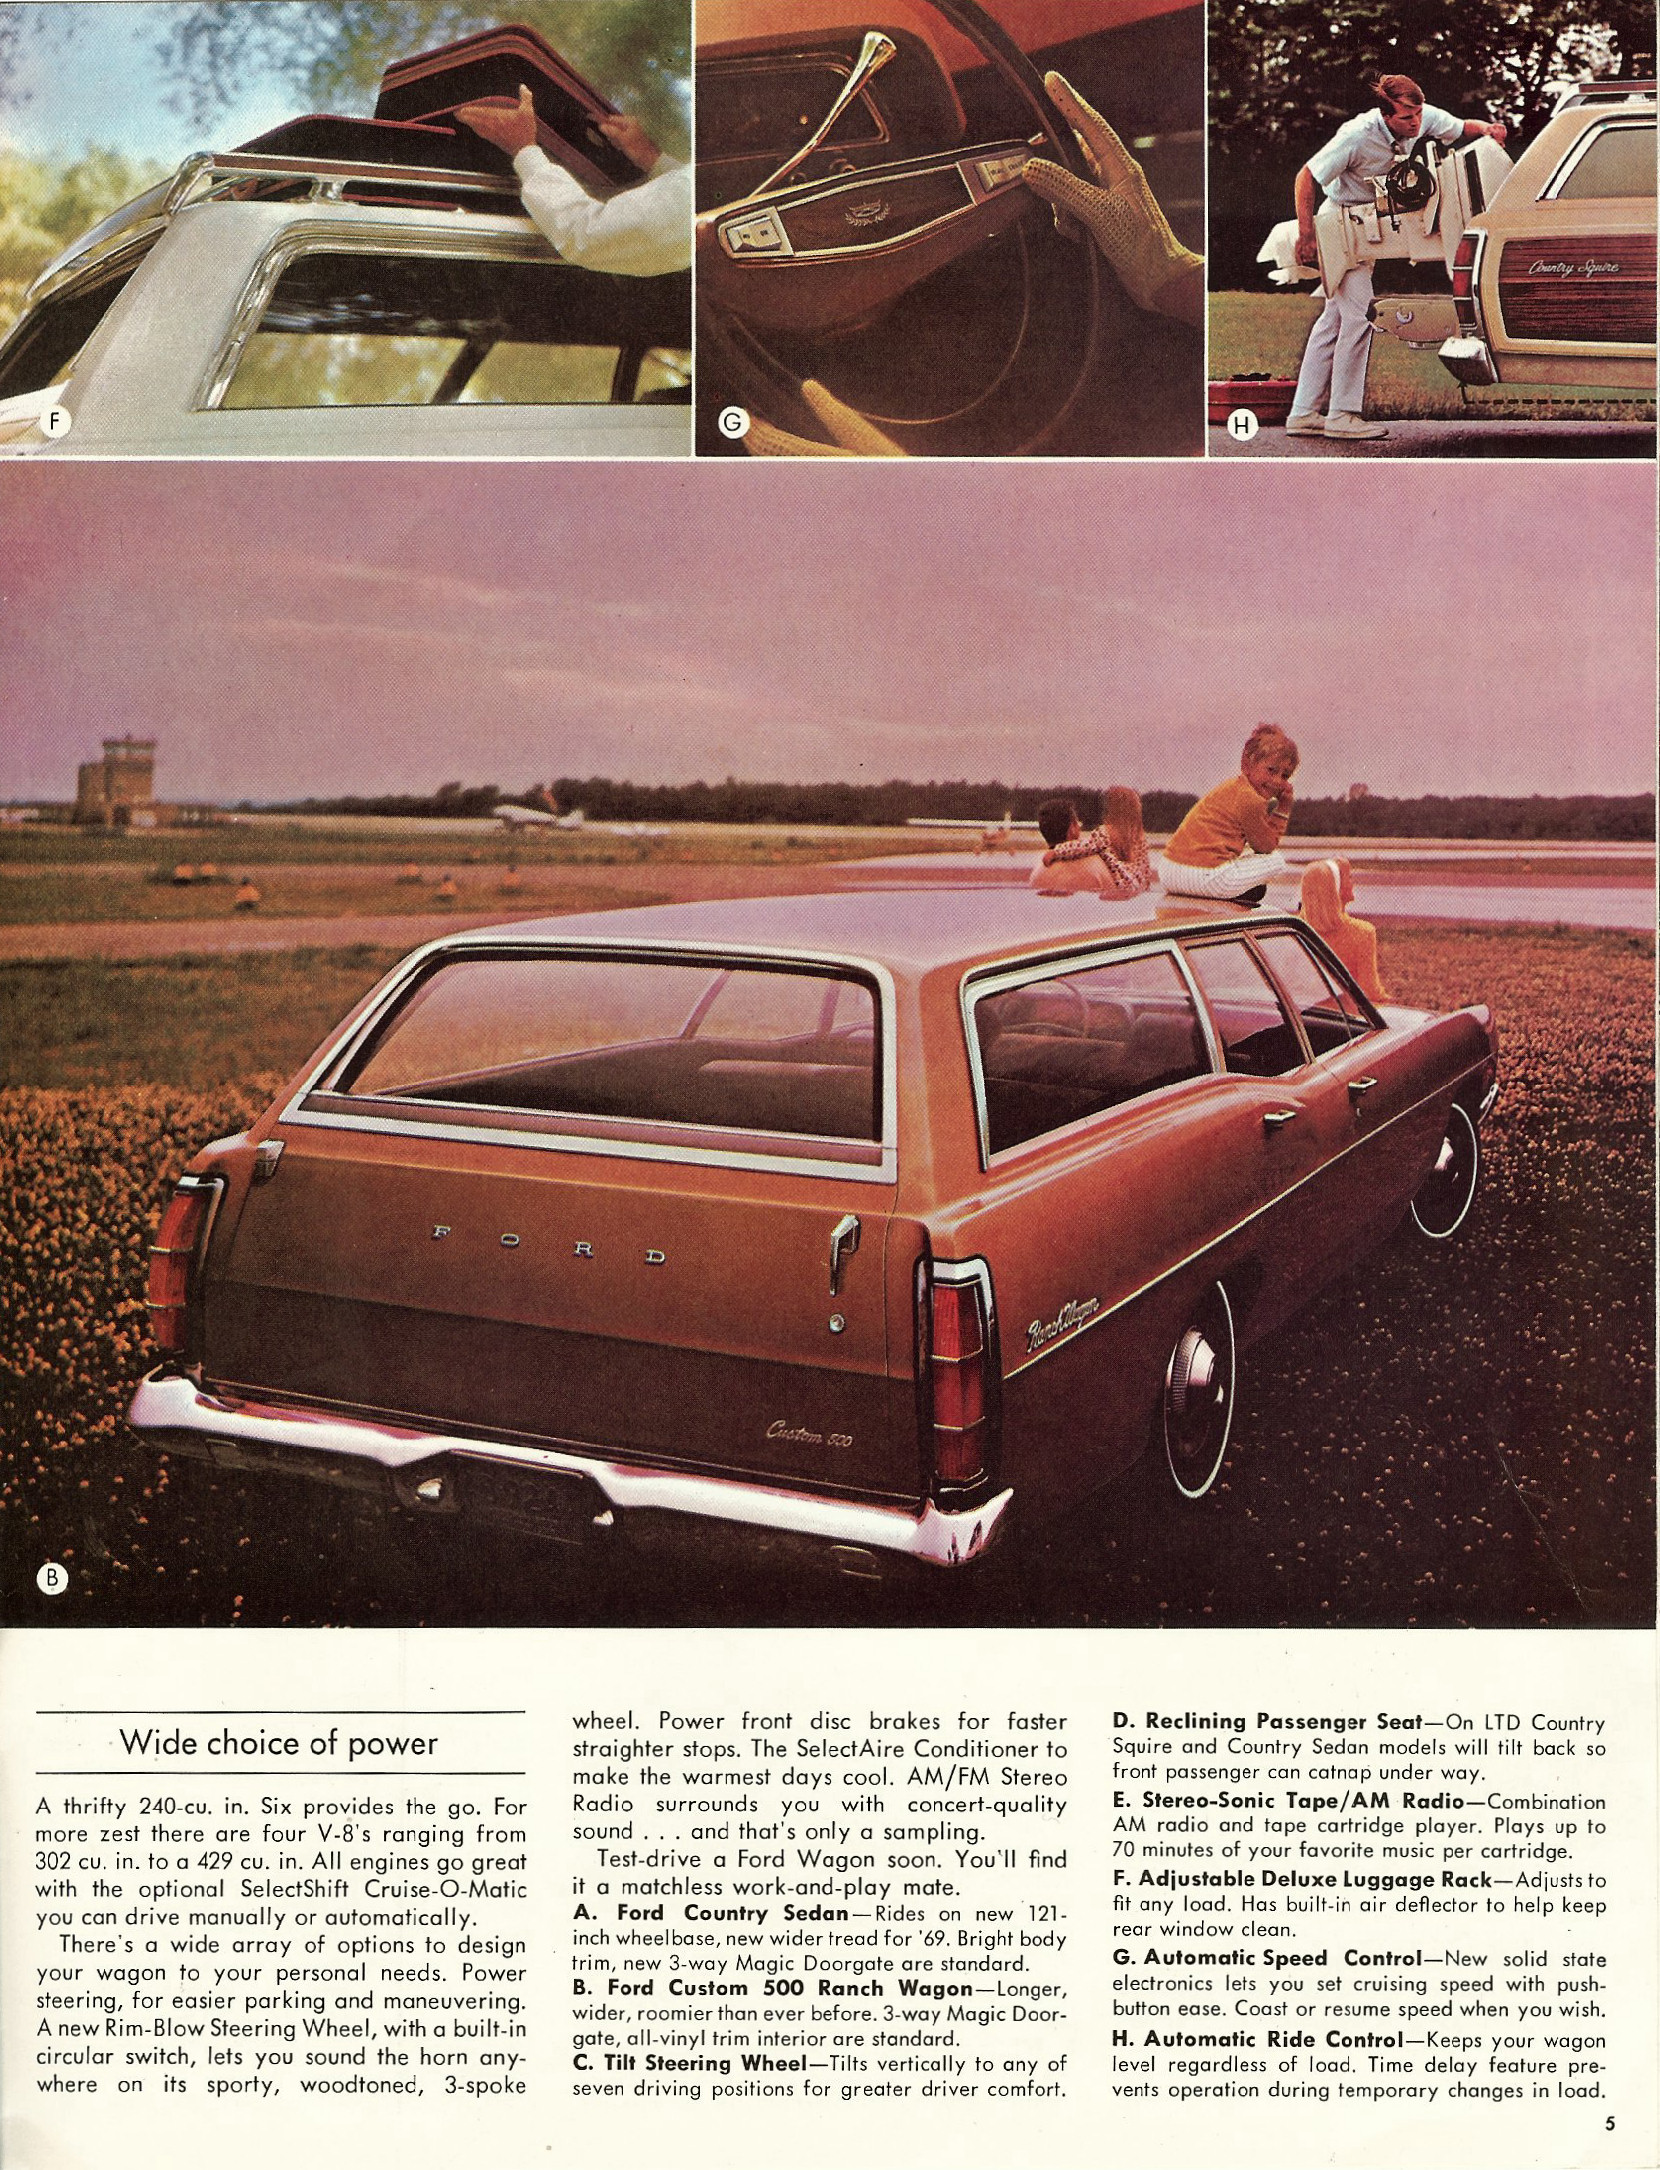 1969 Ford Wagons Brochure Page 2